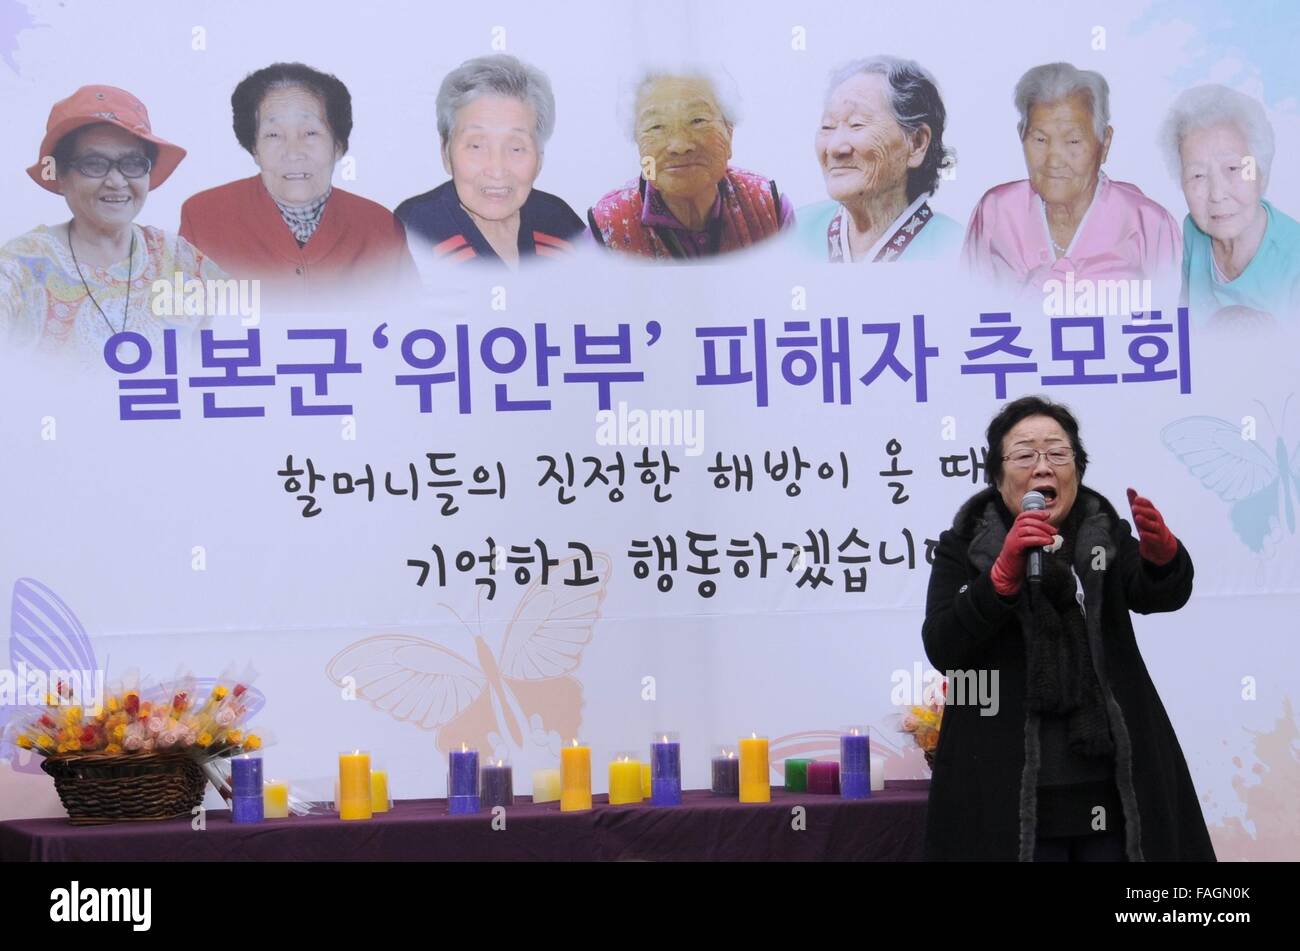 Seoul, South Korea. 30th Dec, 2015. Former South Korean 'comfort women' Lee Yong-soo speaks at a weekly anti-Japan protest in front of the Japanese embassy in Seoul, South Korea, Dec. 30, 2015. Credit:  Jiang Ye/Xinhua/Alamy Live News Stock Photo